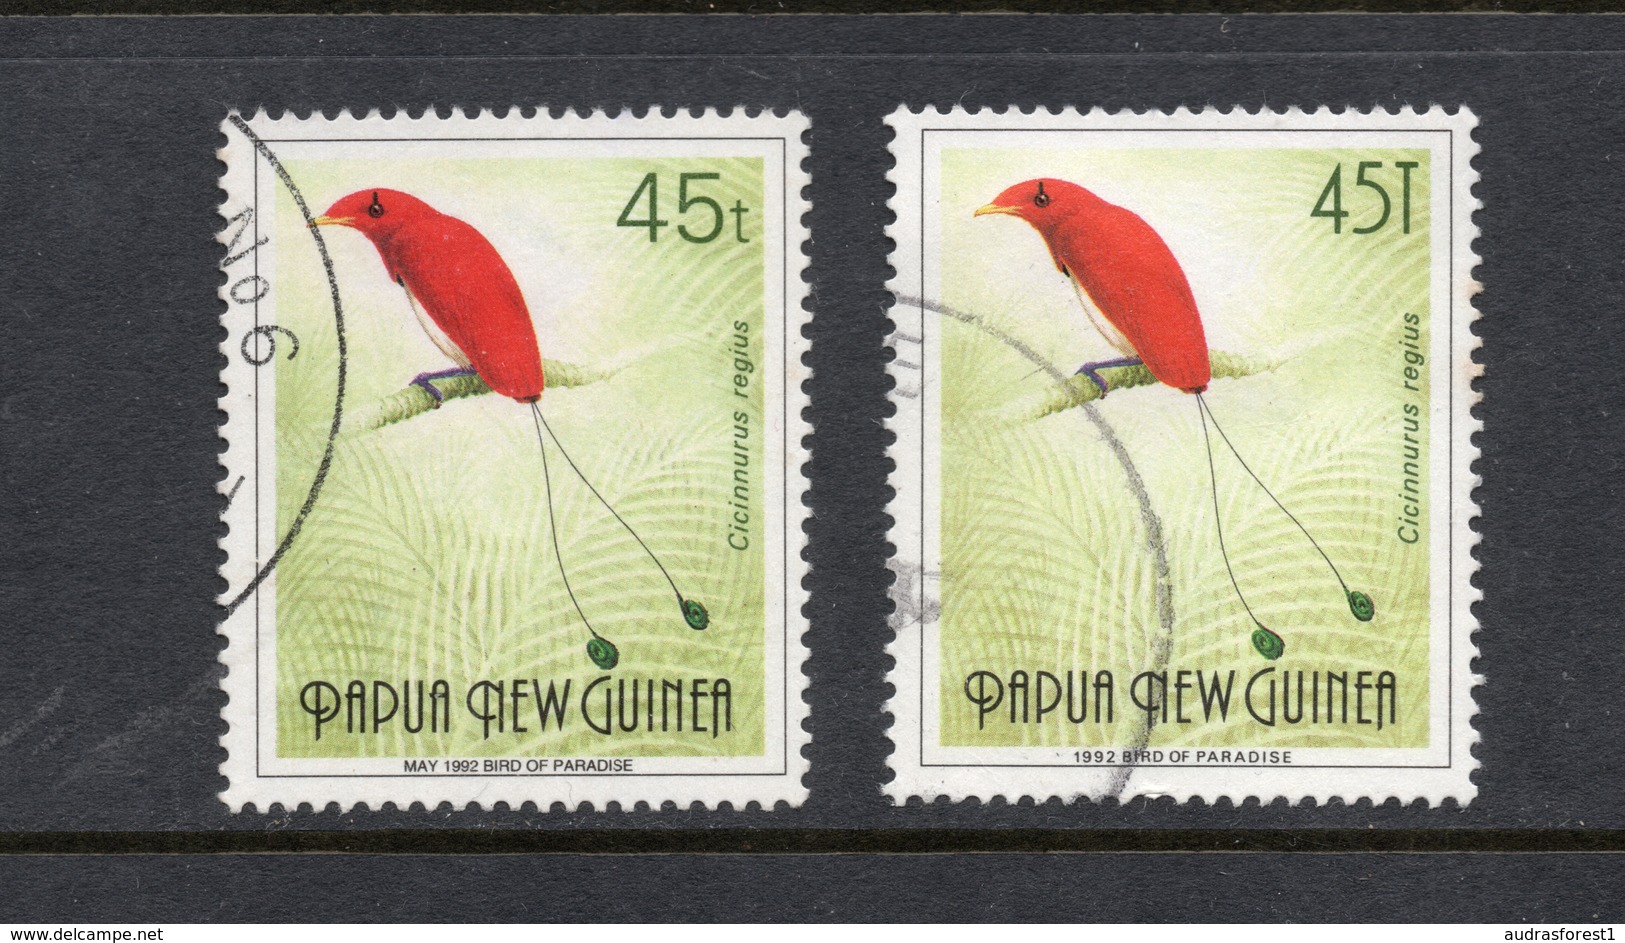 RED BIRD OF PARADISE PAPUA NEW GUINEA Both Values - 45t (issued In 1992) & 45T (1993 Issued In 1993) VERY FINE USED - Songbirds & Tree Dwellers